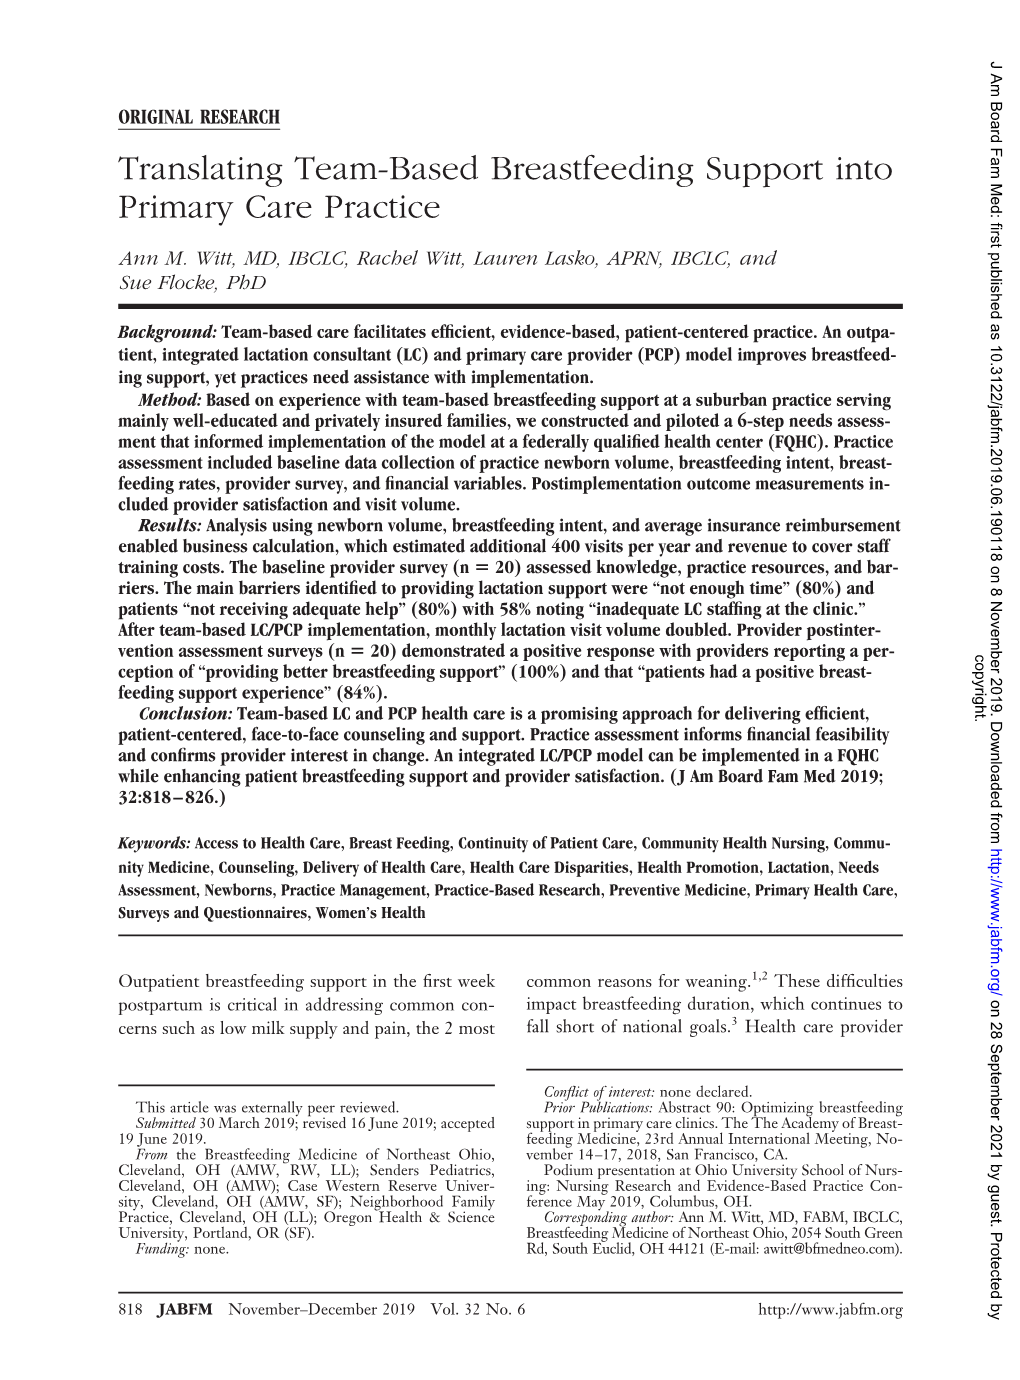 Translating Team-Based Breastfeeding Support Into Primary Care Practice